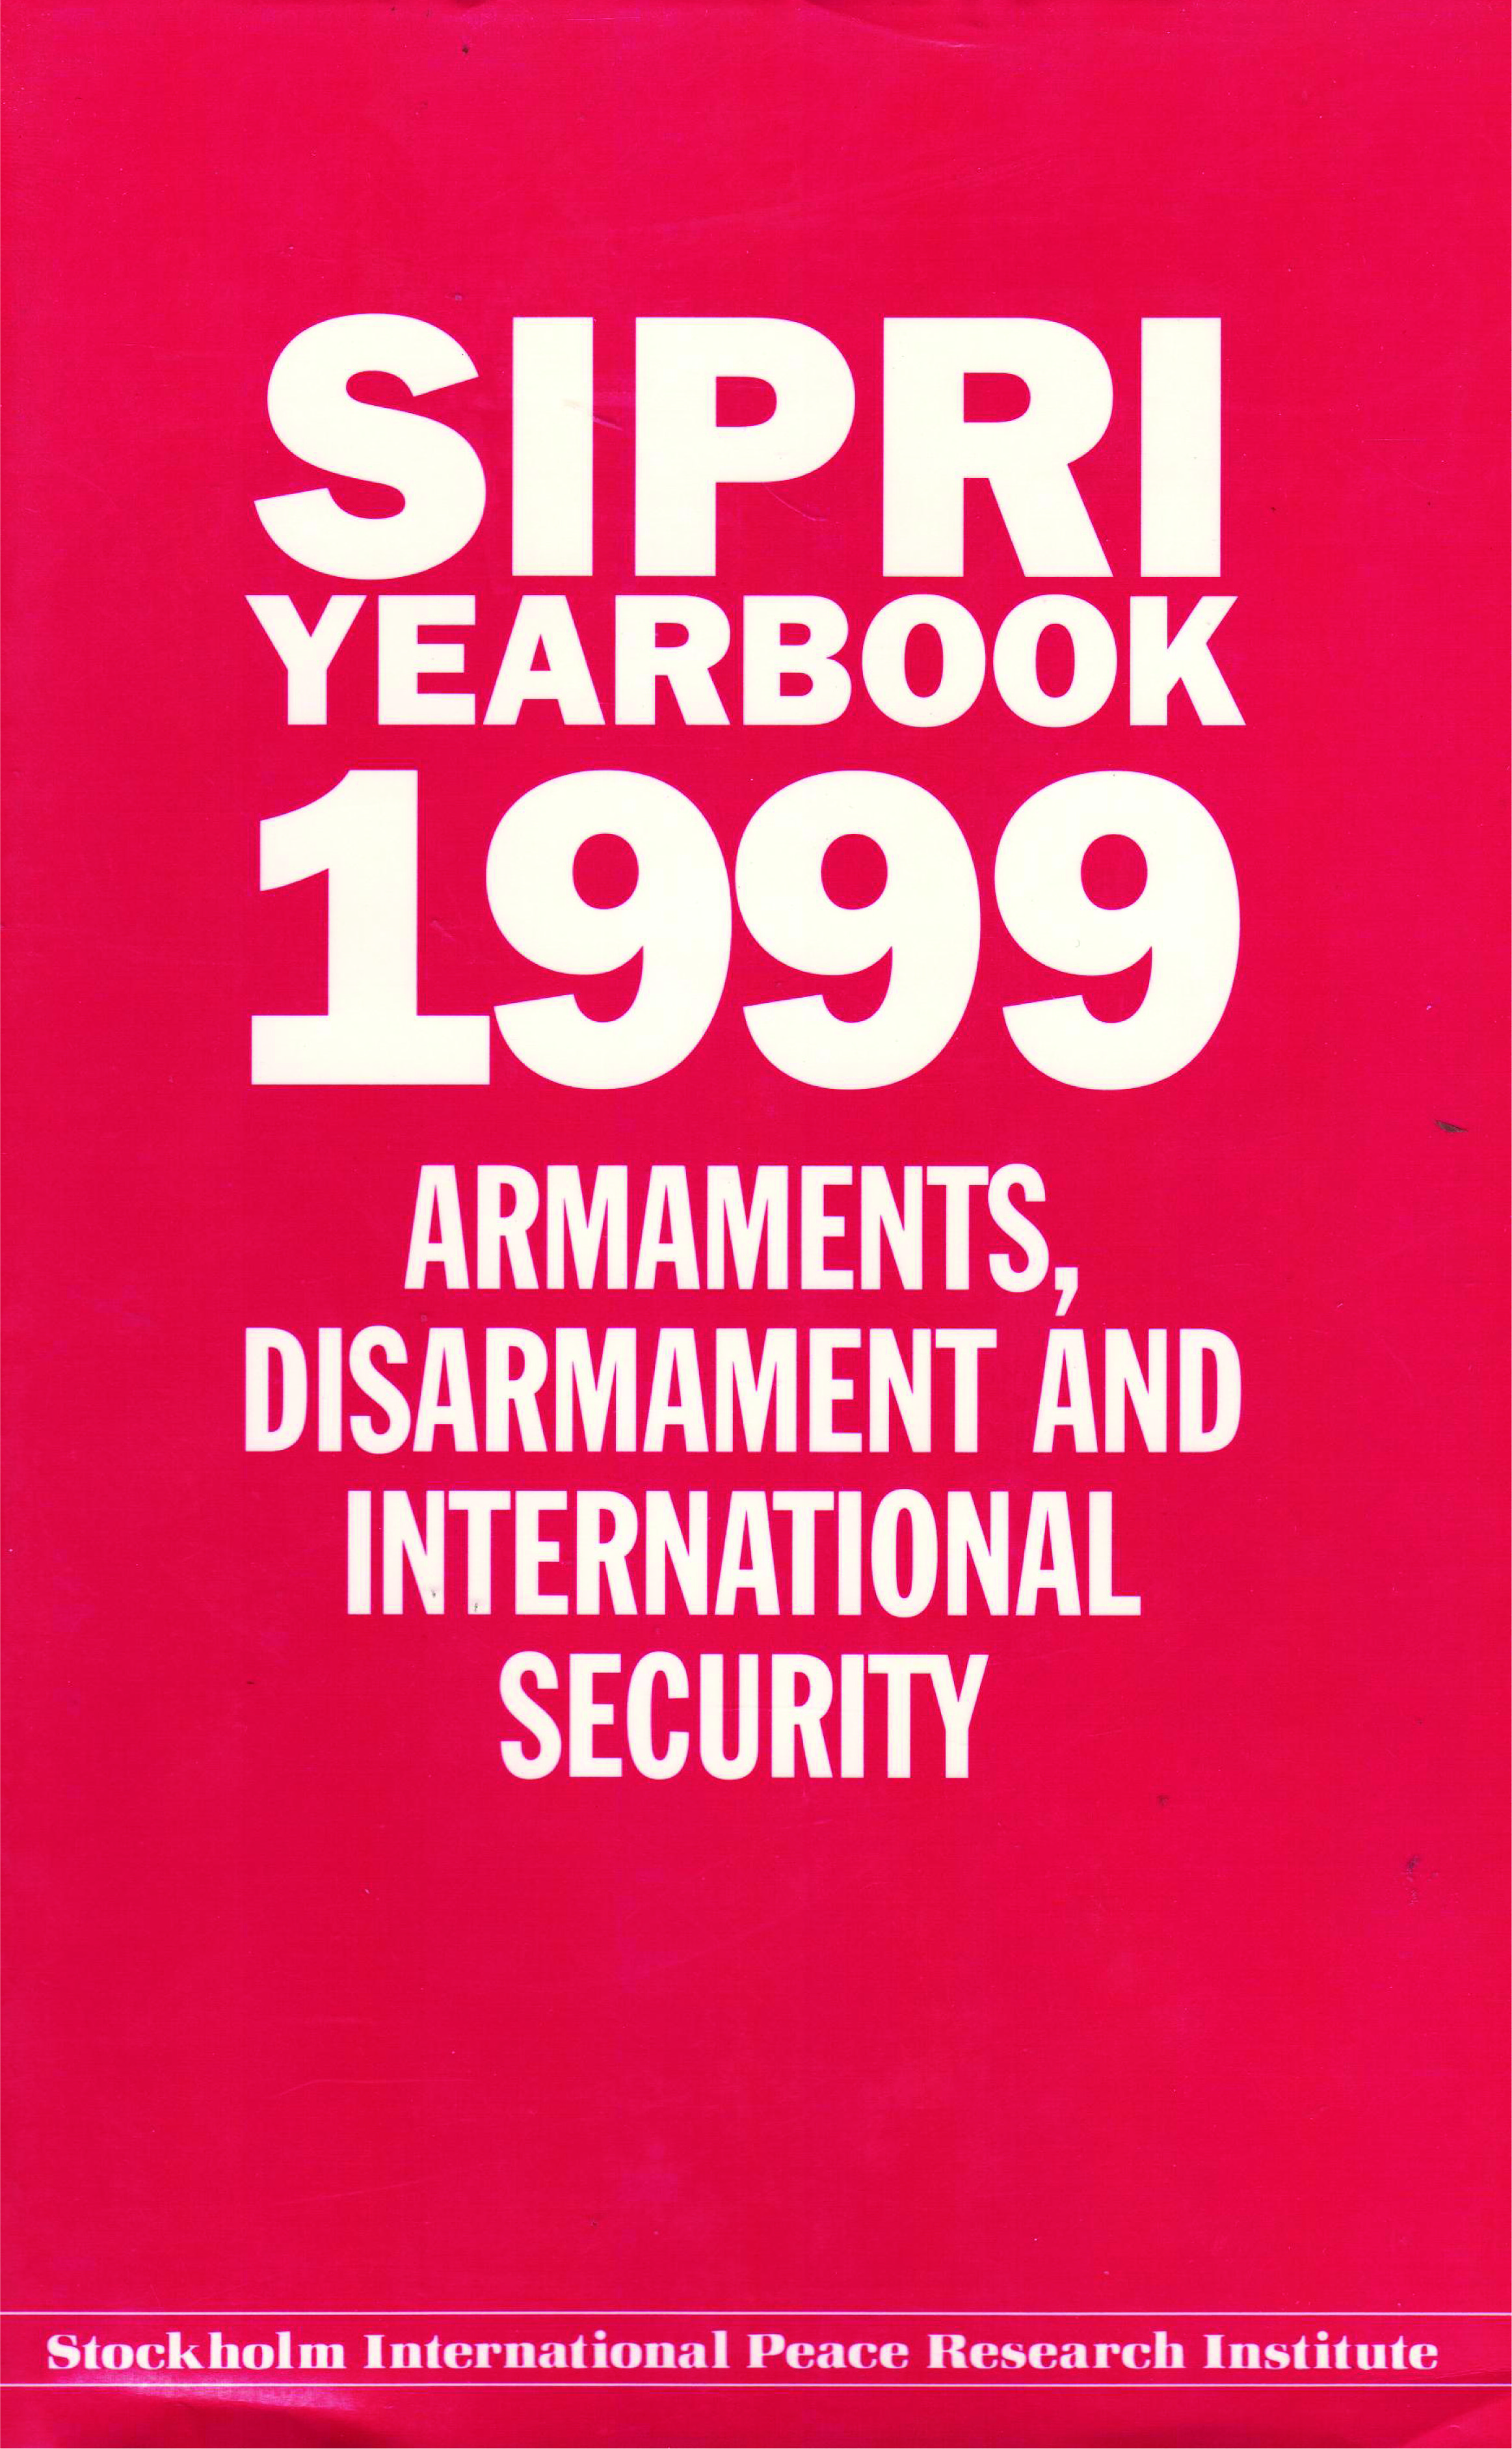 SIPRI yearbook 1999 cover